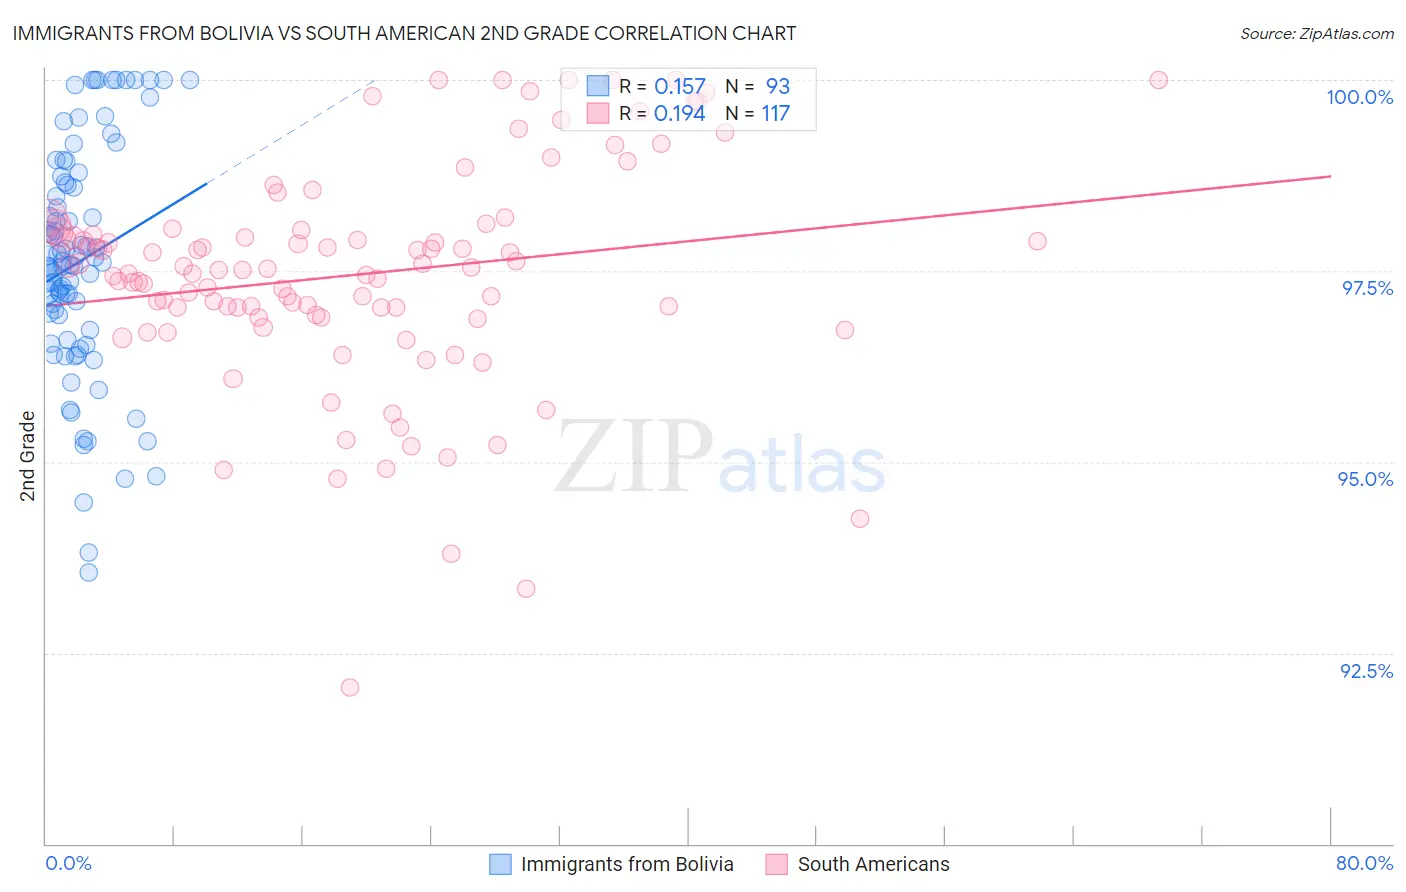 Immigrants from Bolivia vs South American 2nd Grade